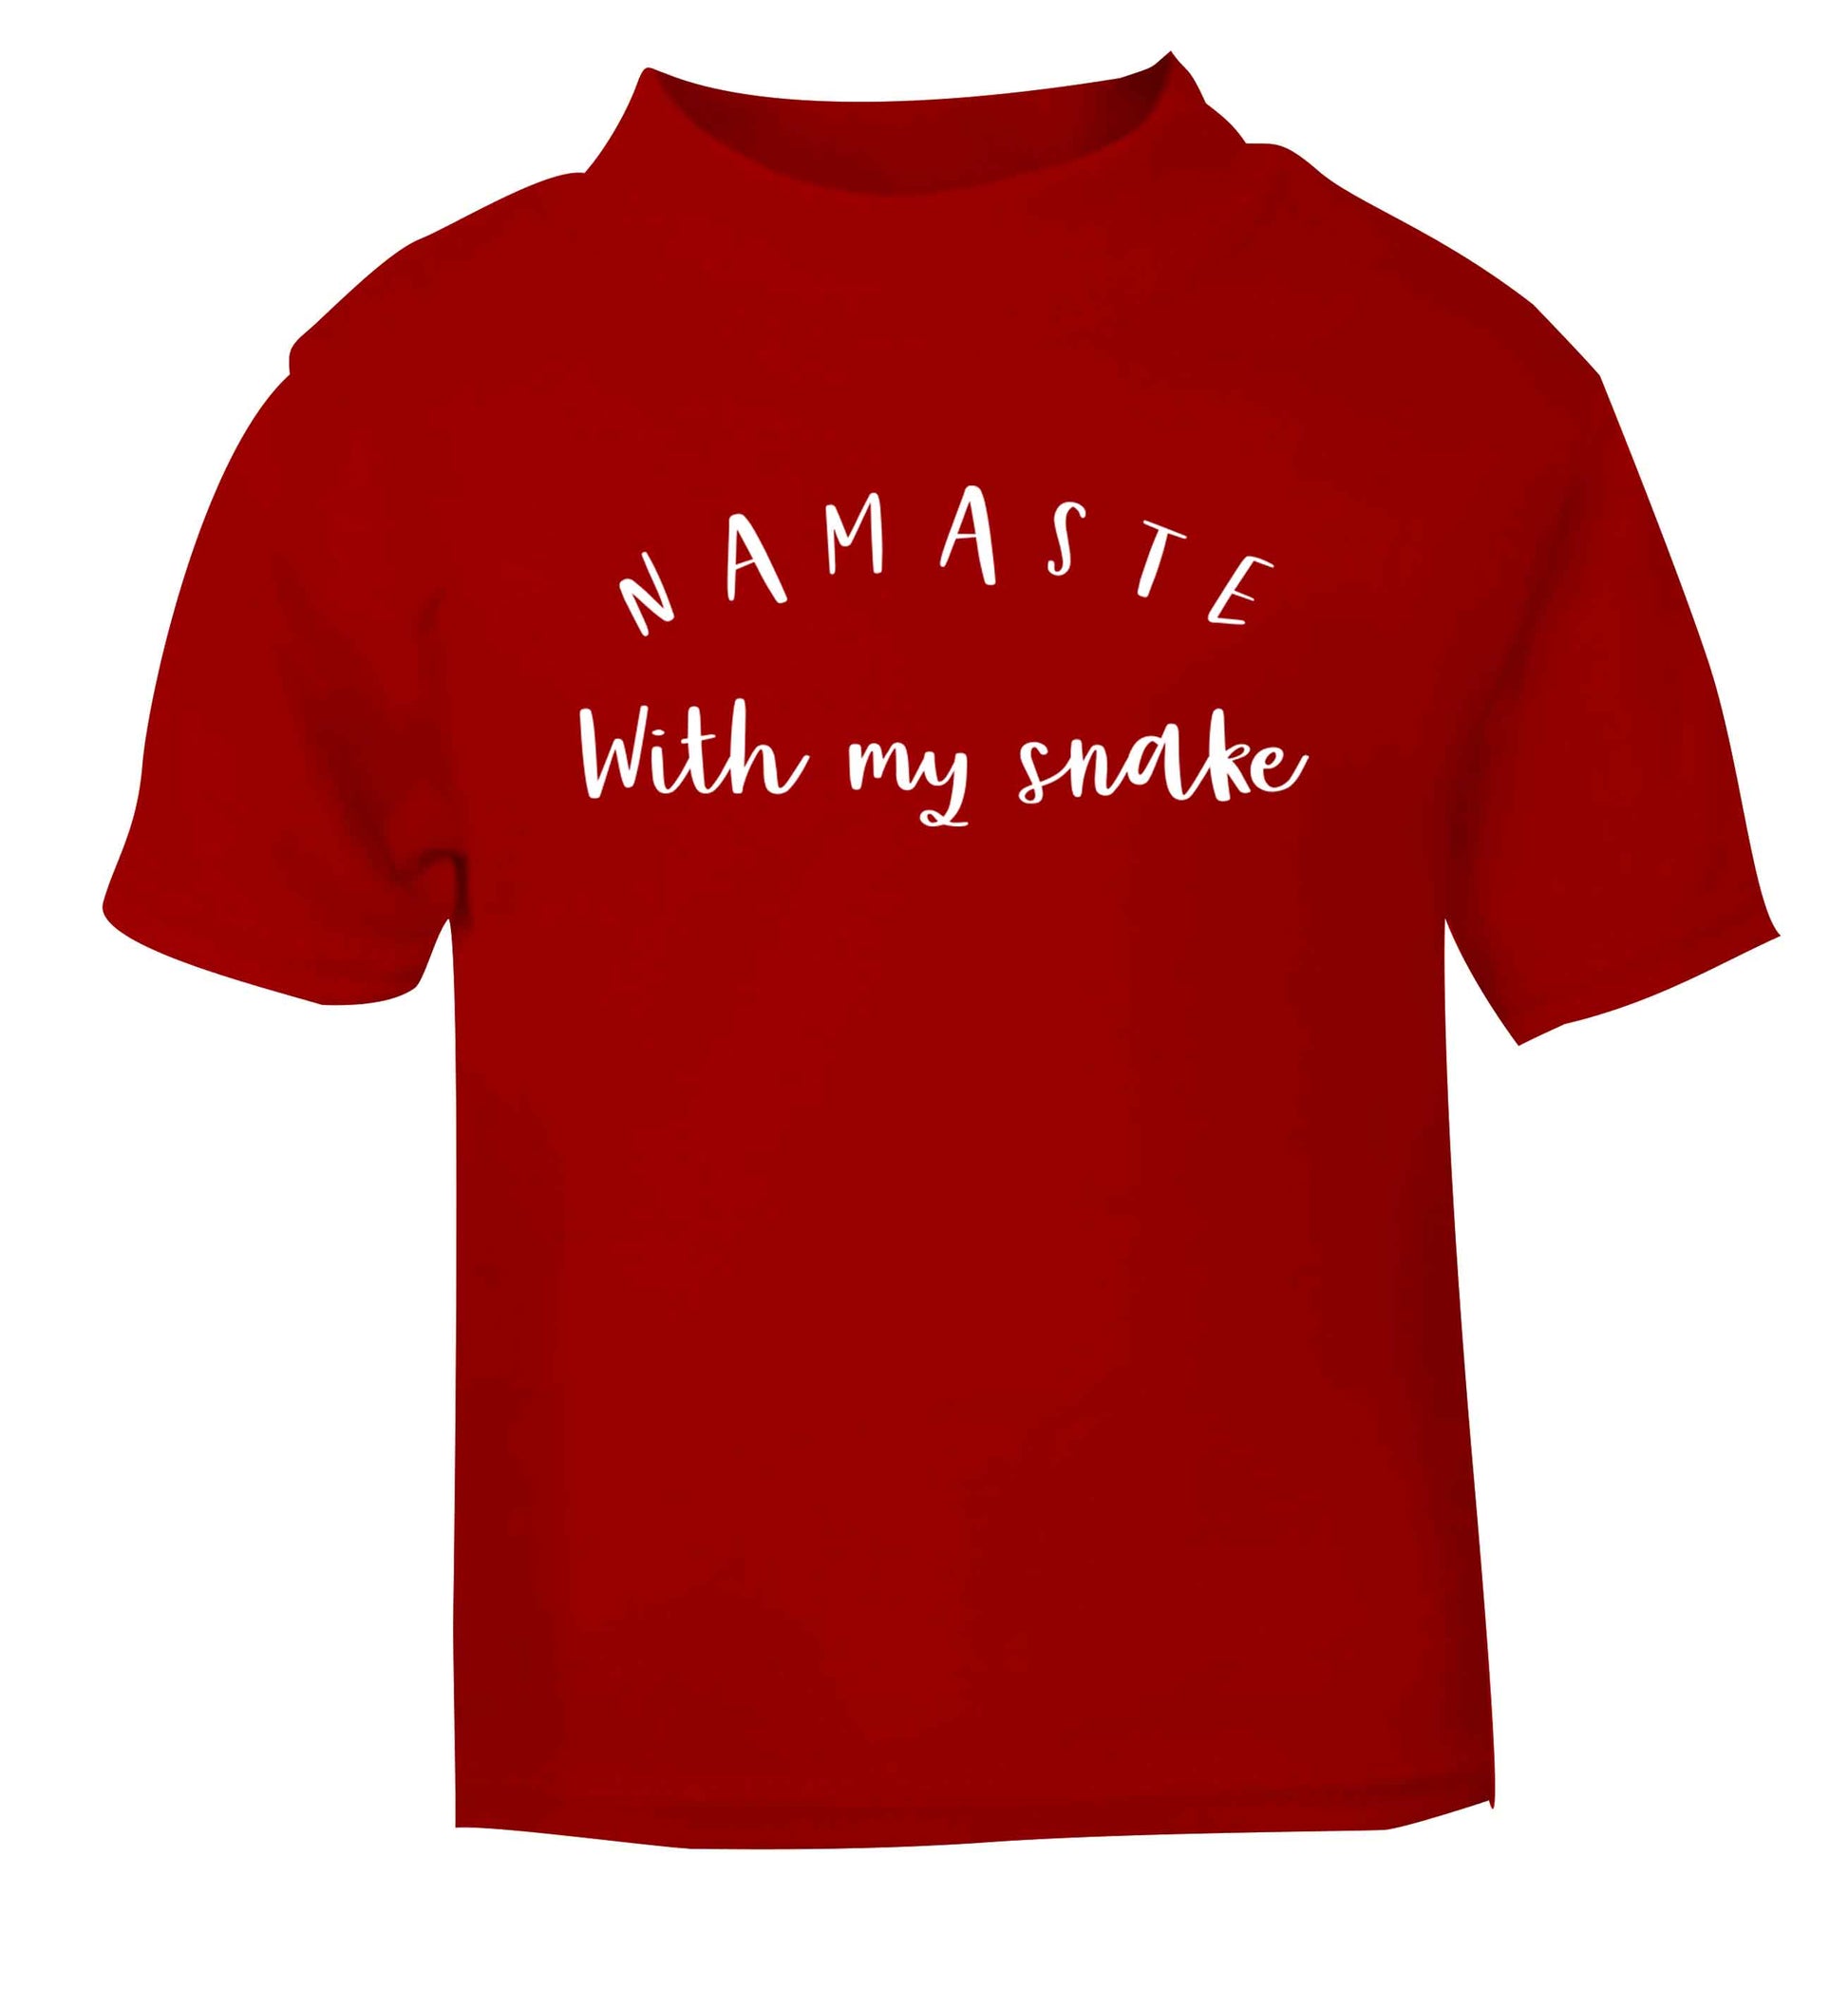 Namaste with my snake red Baby Toddler Tshirt 2 Years